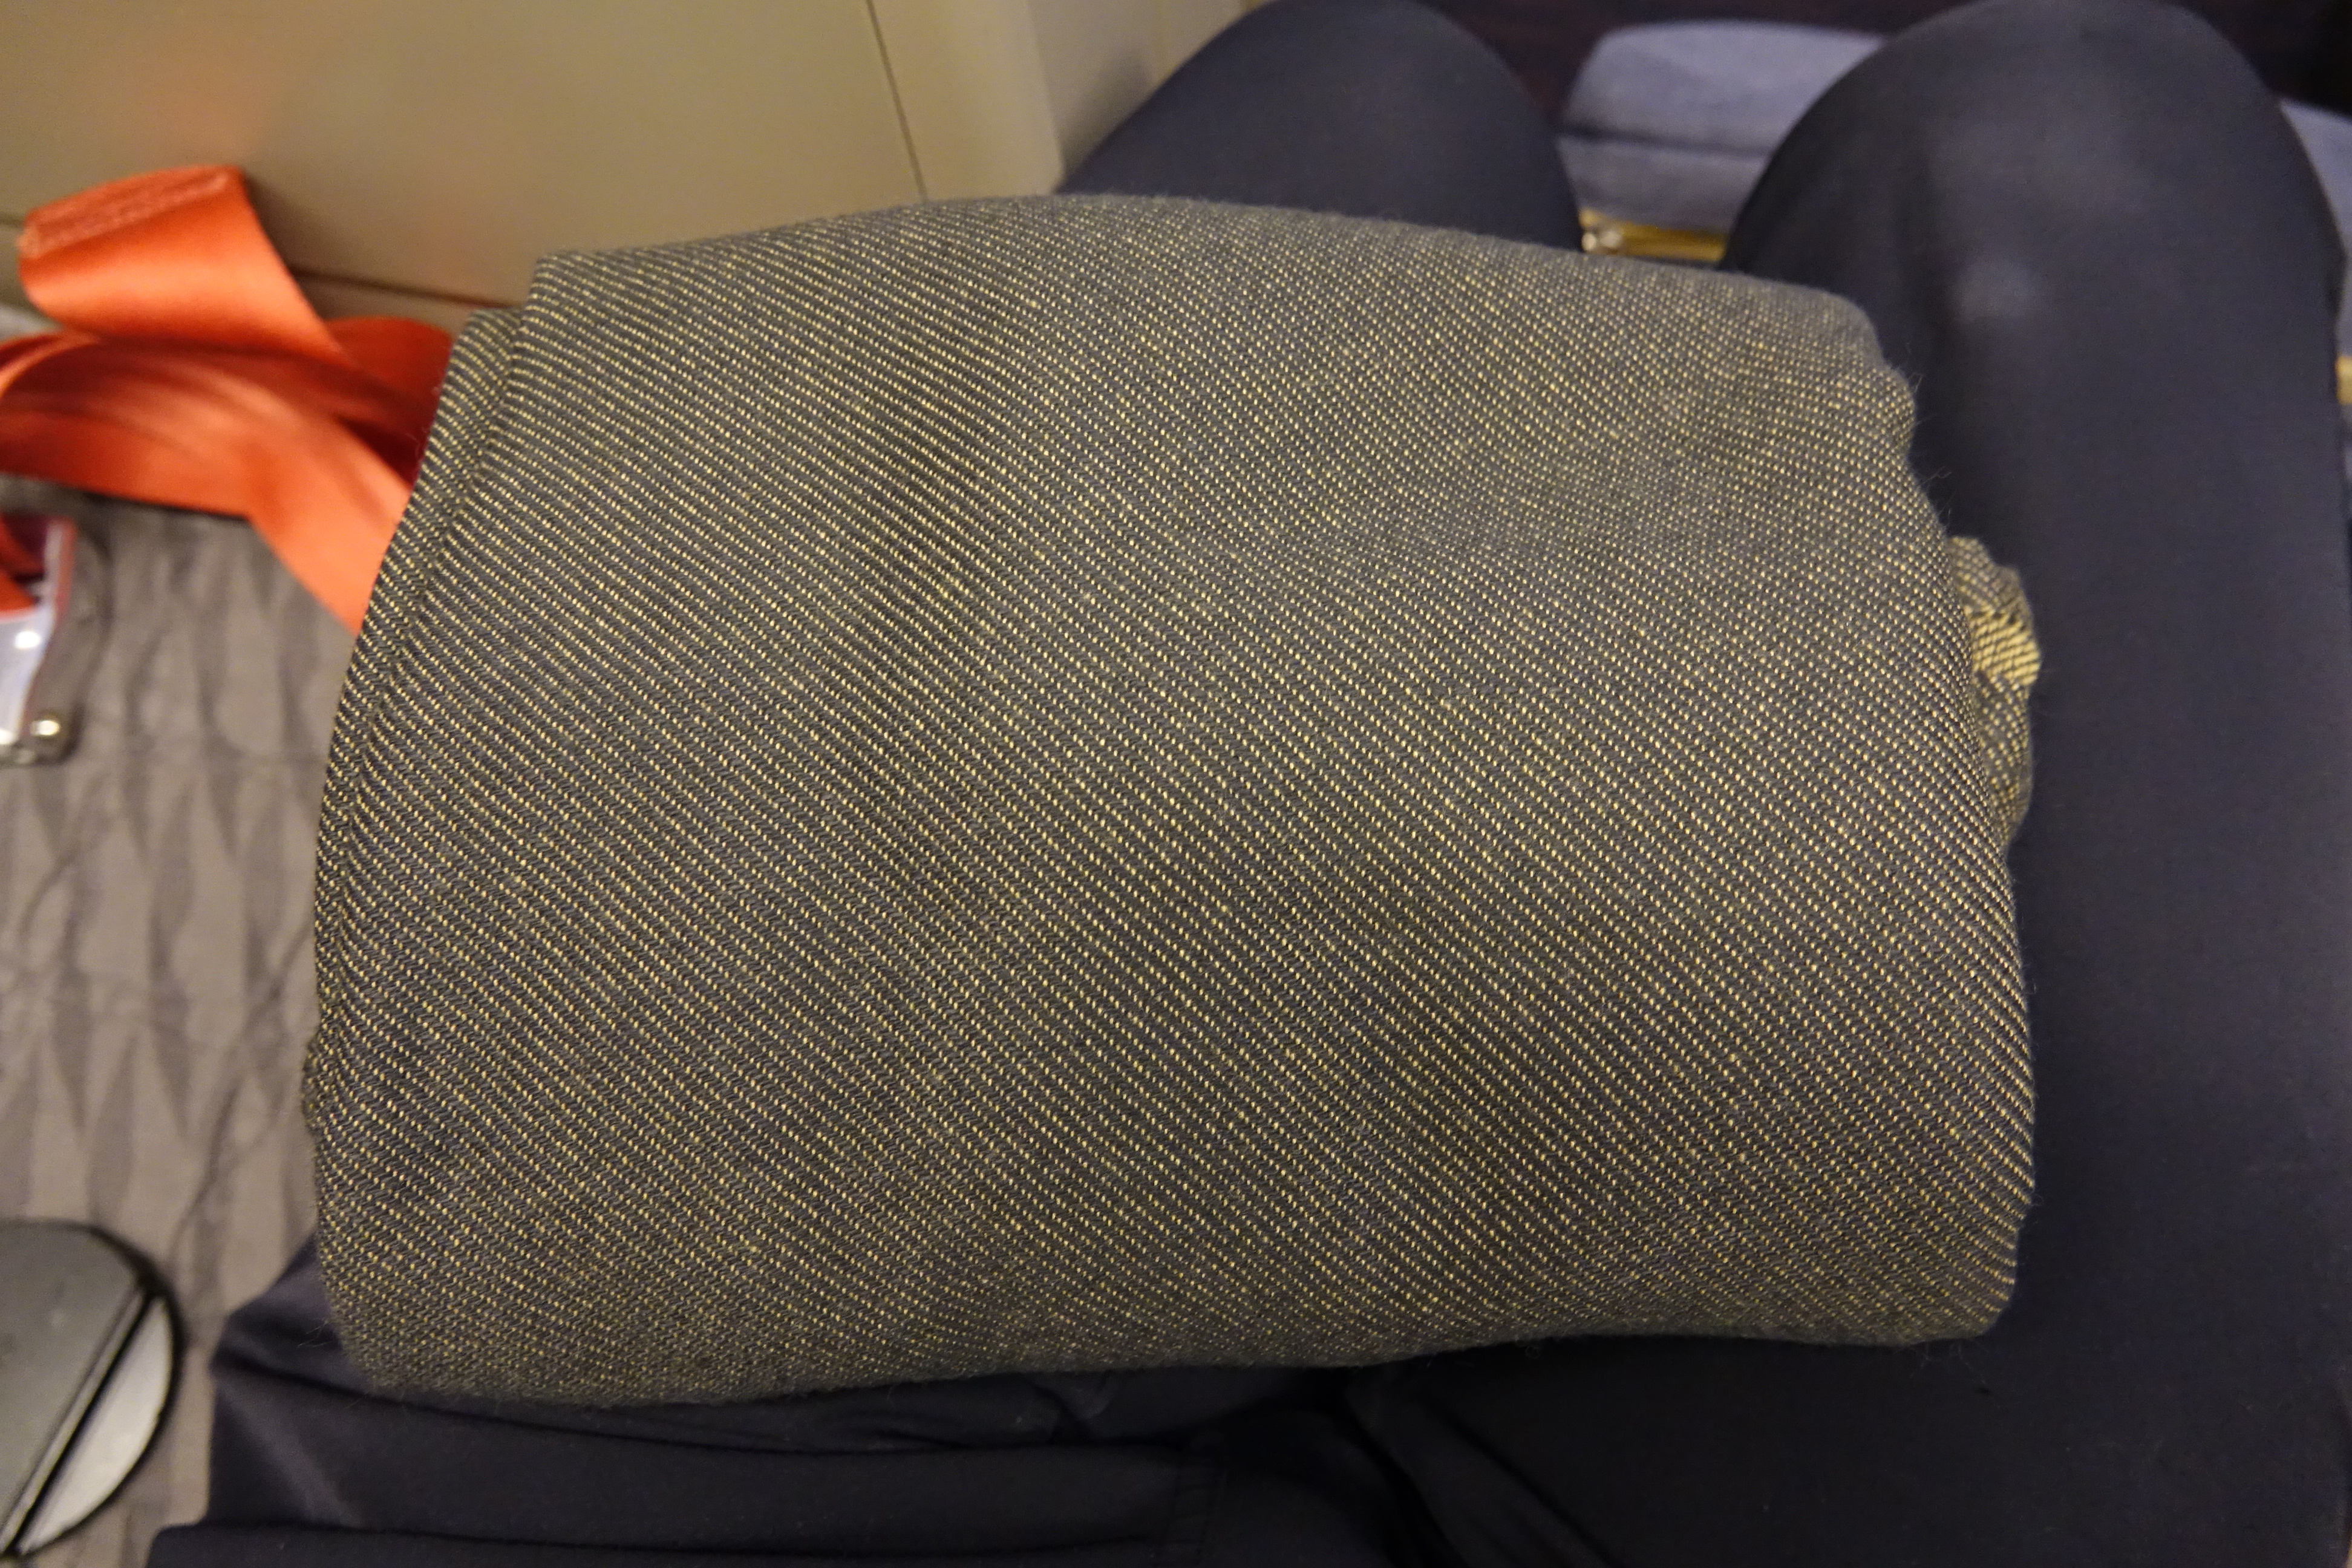 a rolled up fabric on a person's lap